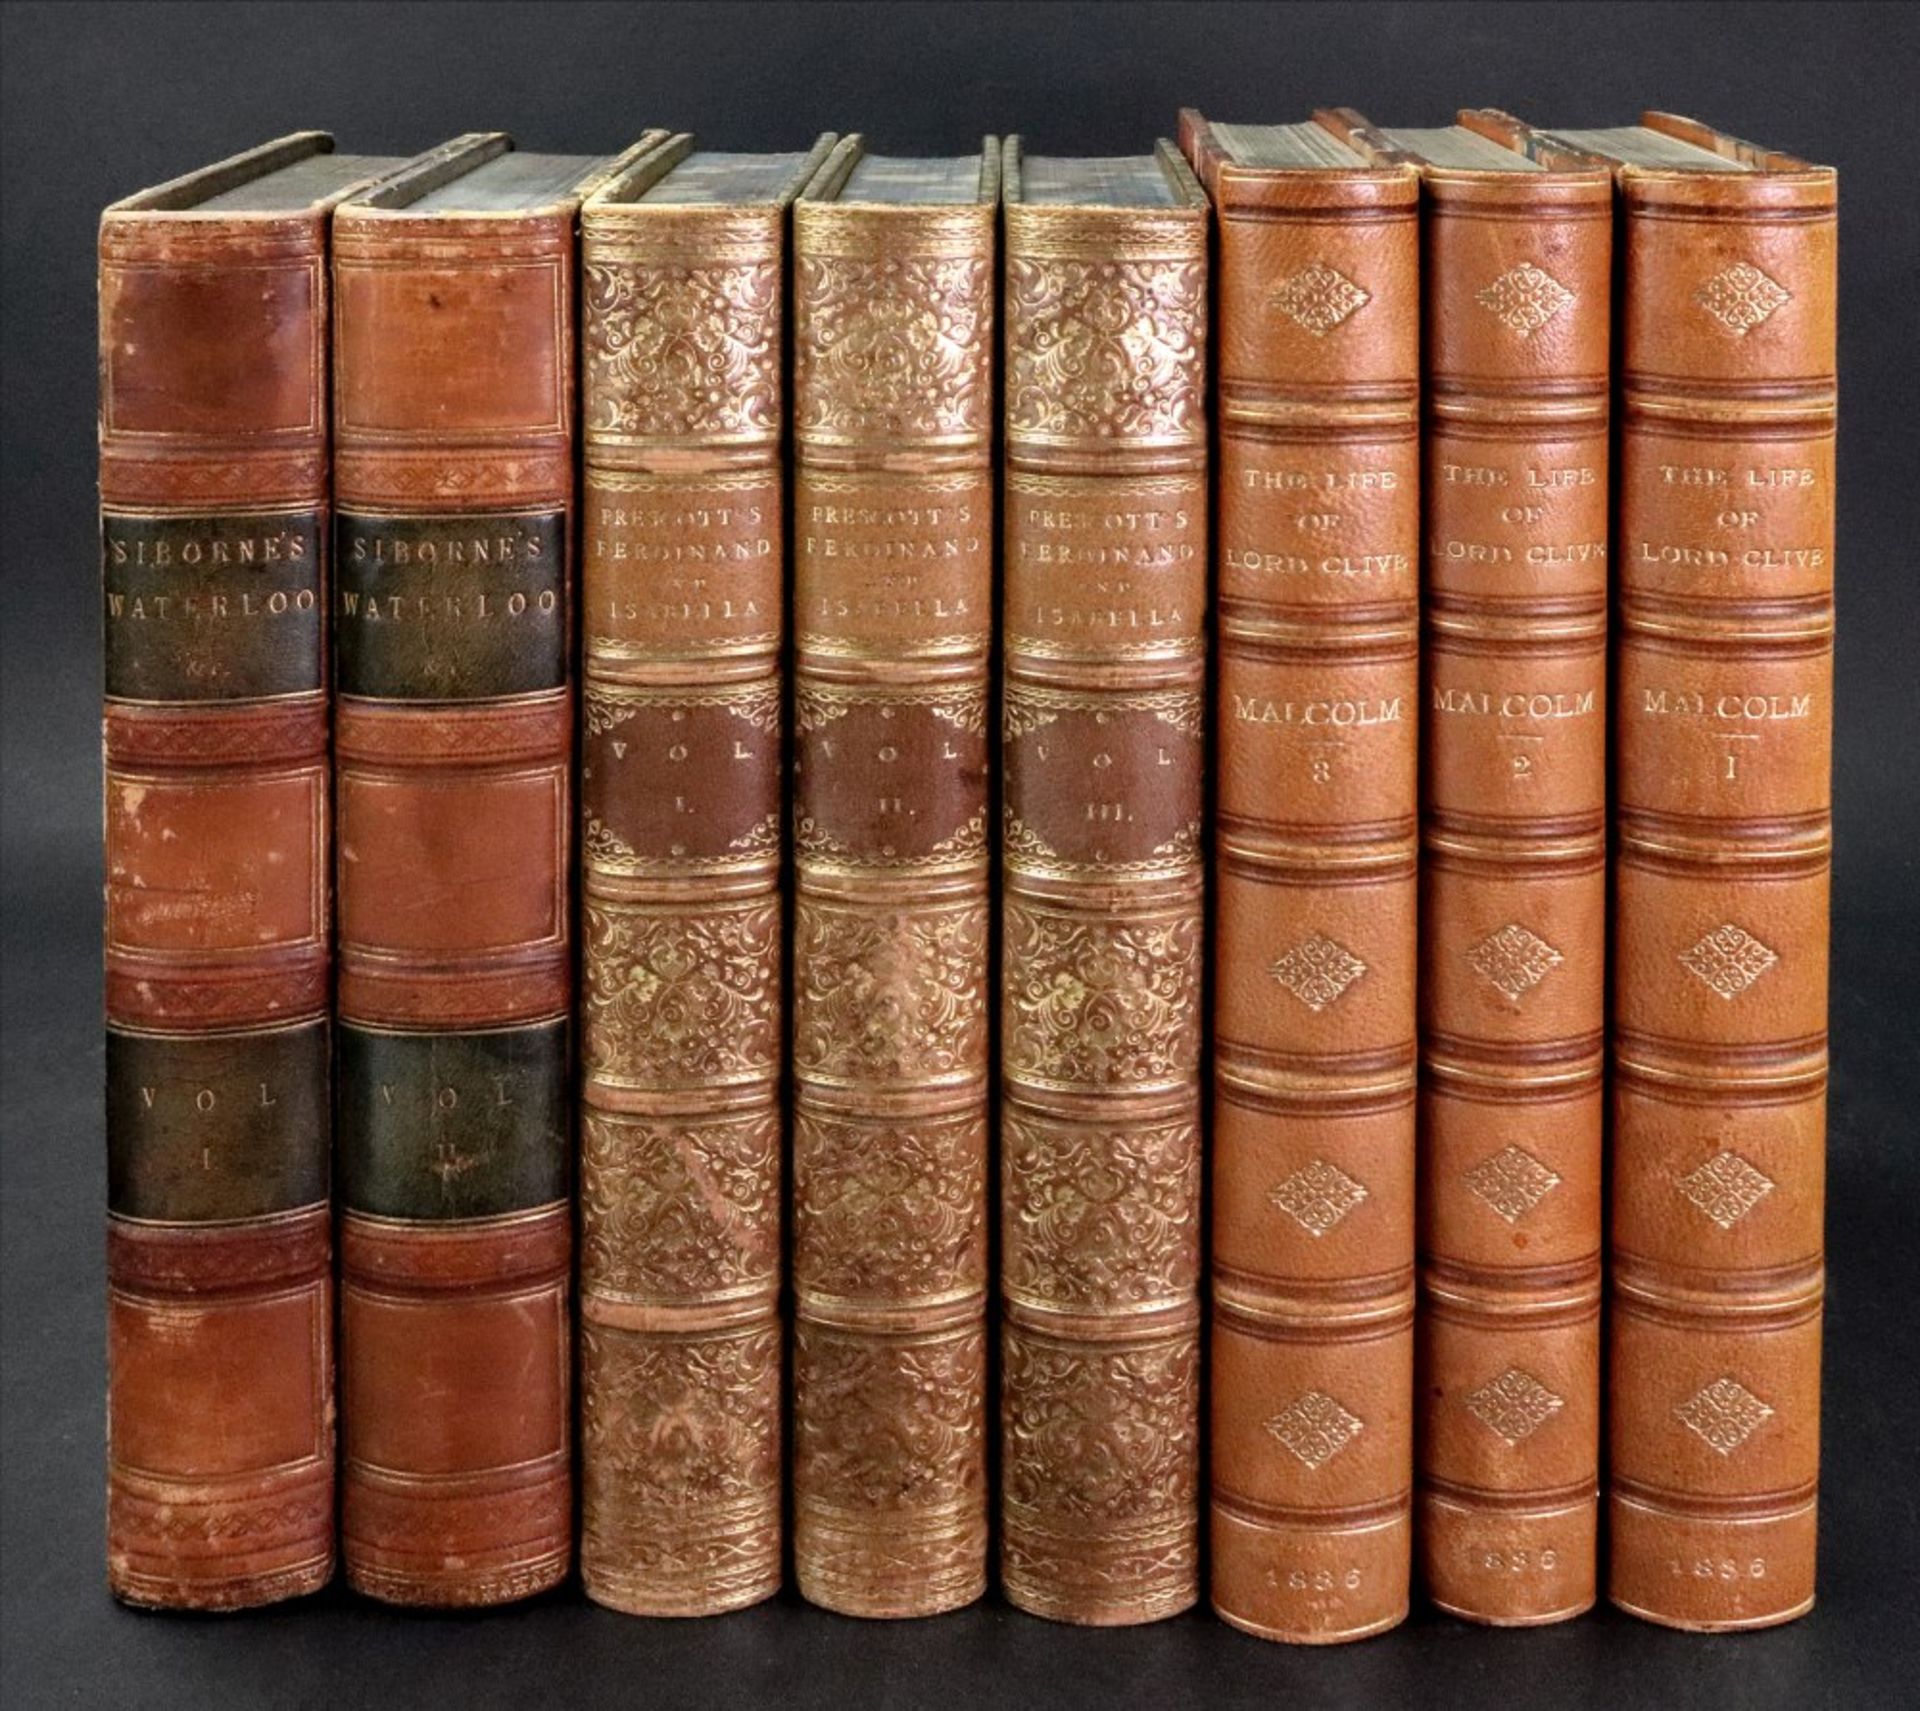 MALCOLM (Sir John) The Life of Robert, Lord Clive, 3 volumes, 1836,